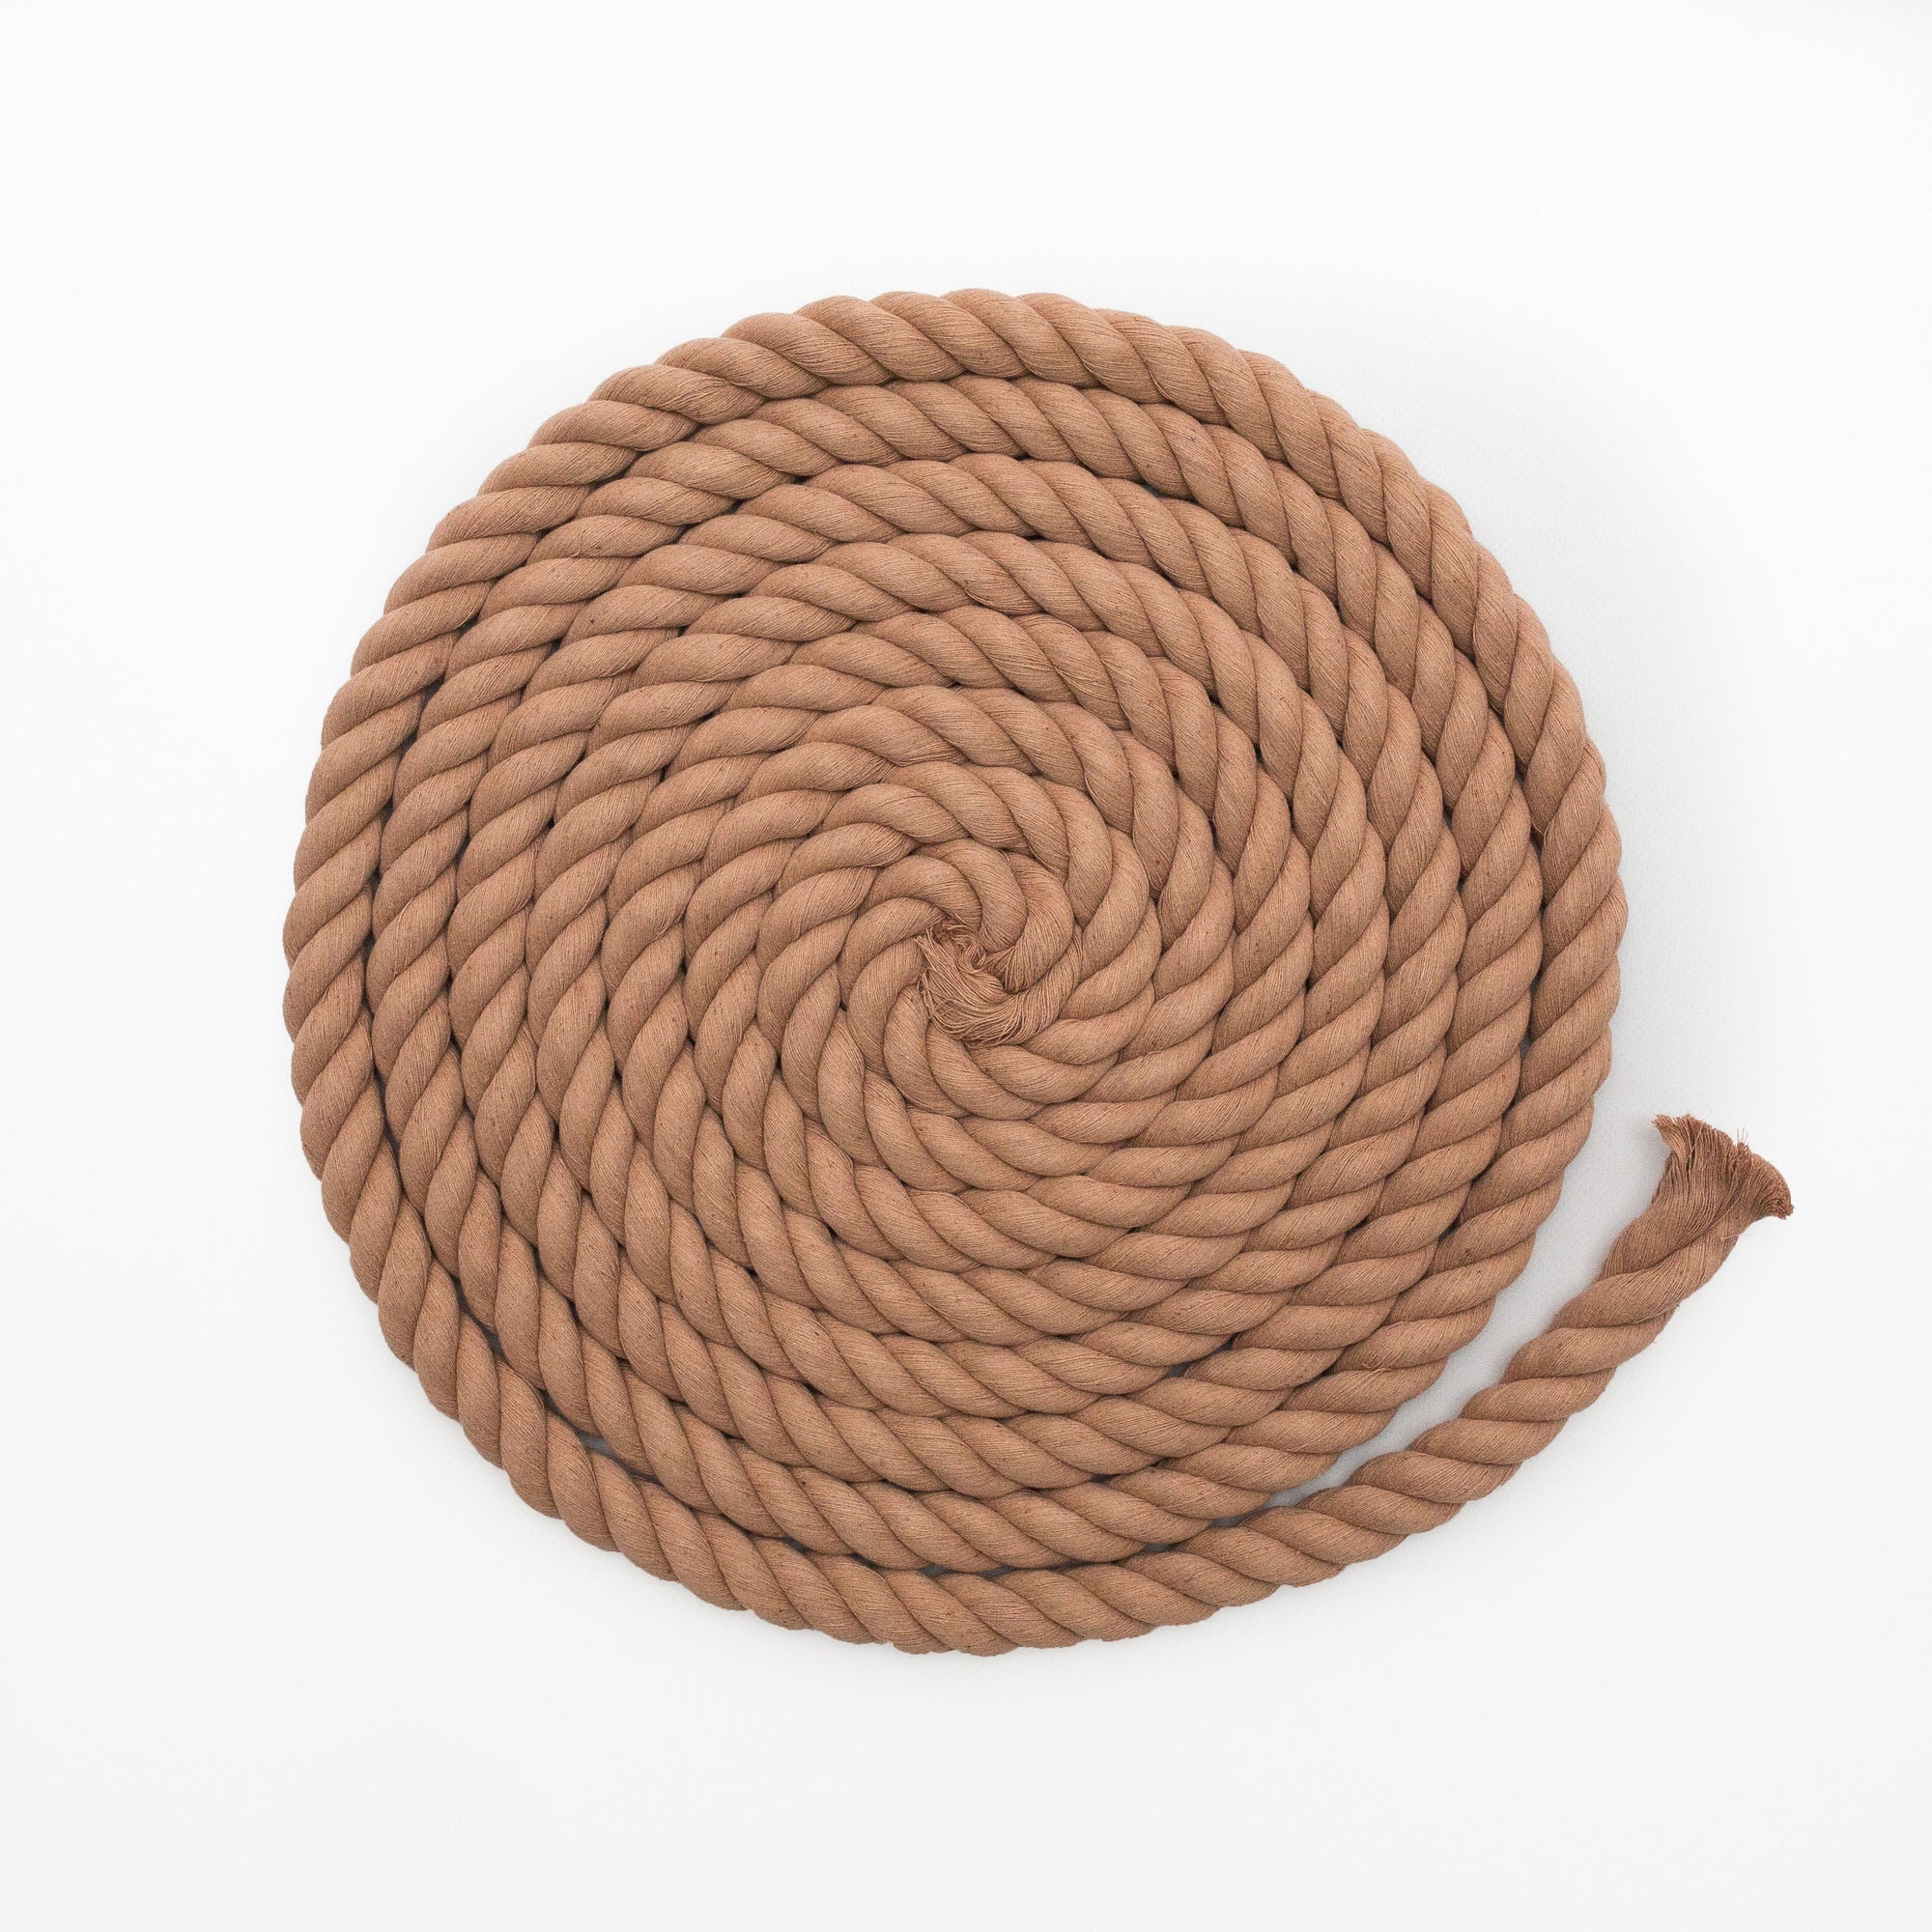 Mary Maker Studio 3Ply Twisted Rope Antique Peach 1m 20mm Coloured Macrame Rope macrame cotton macrame rope macrame workshop macrame patterns macrame